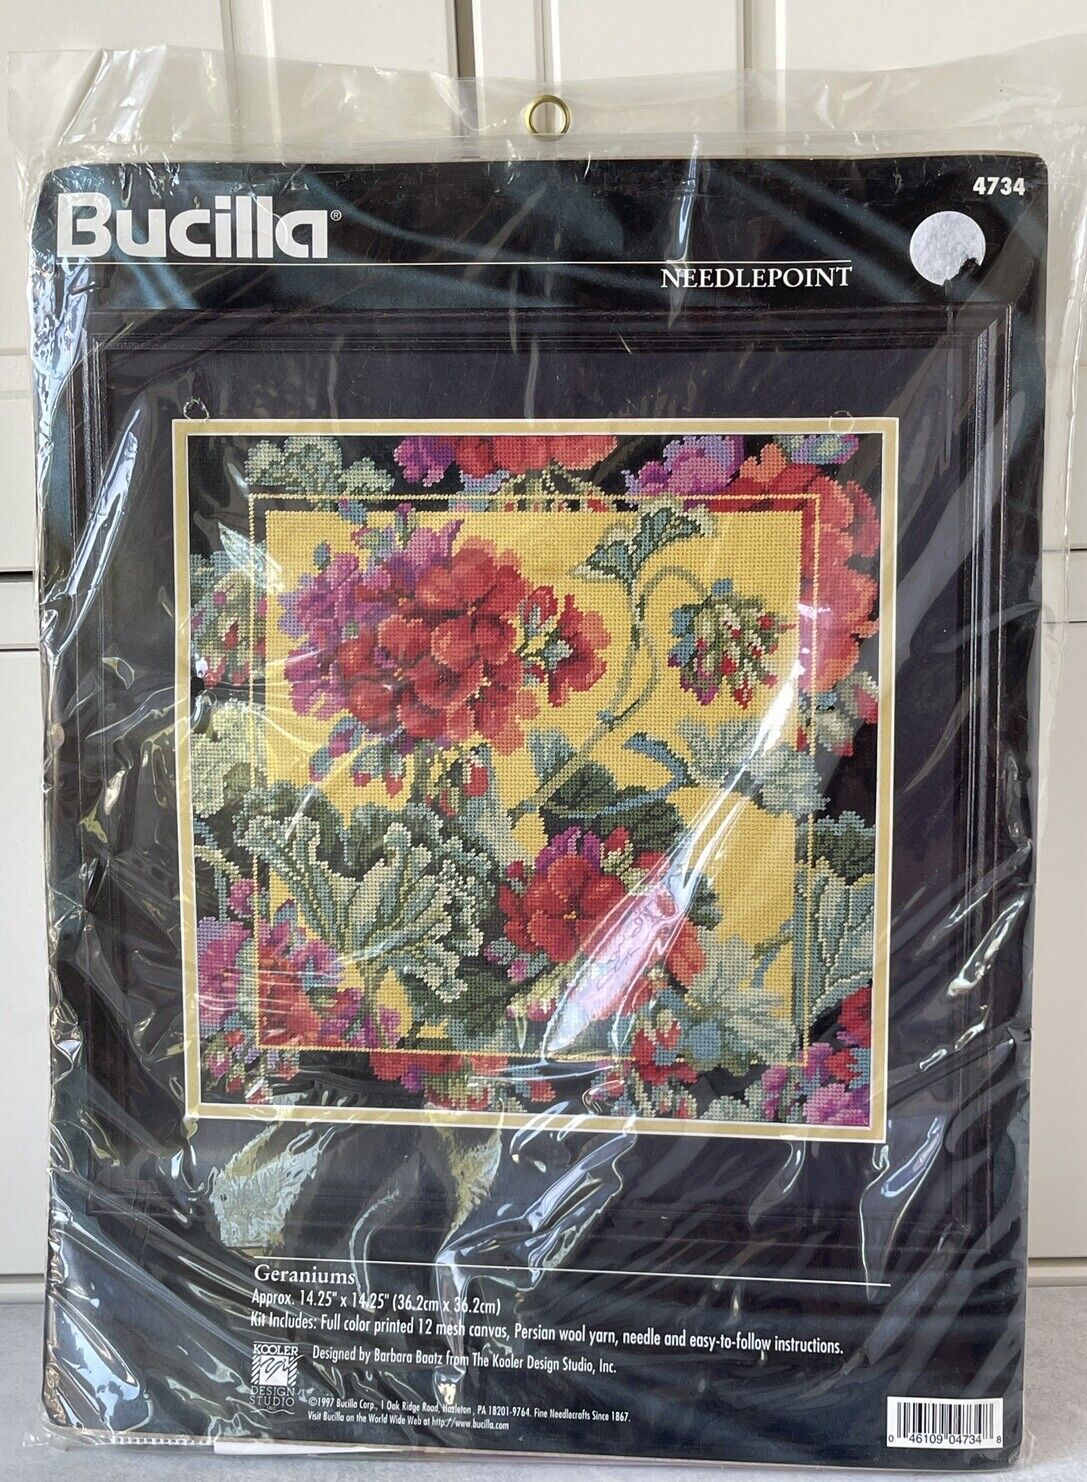 Bucilla Needlepoint Kit 4734 Geraniums 14.25 x 14.25 New in Sealed Pack